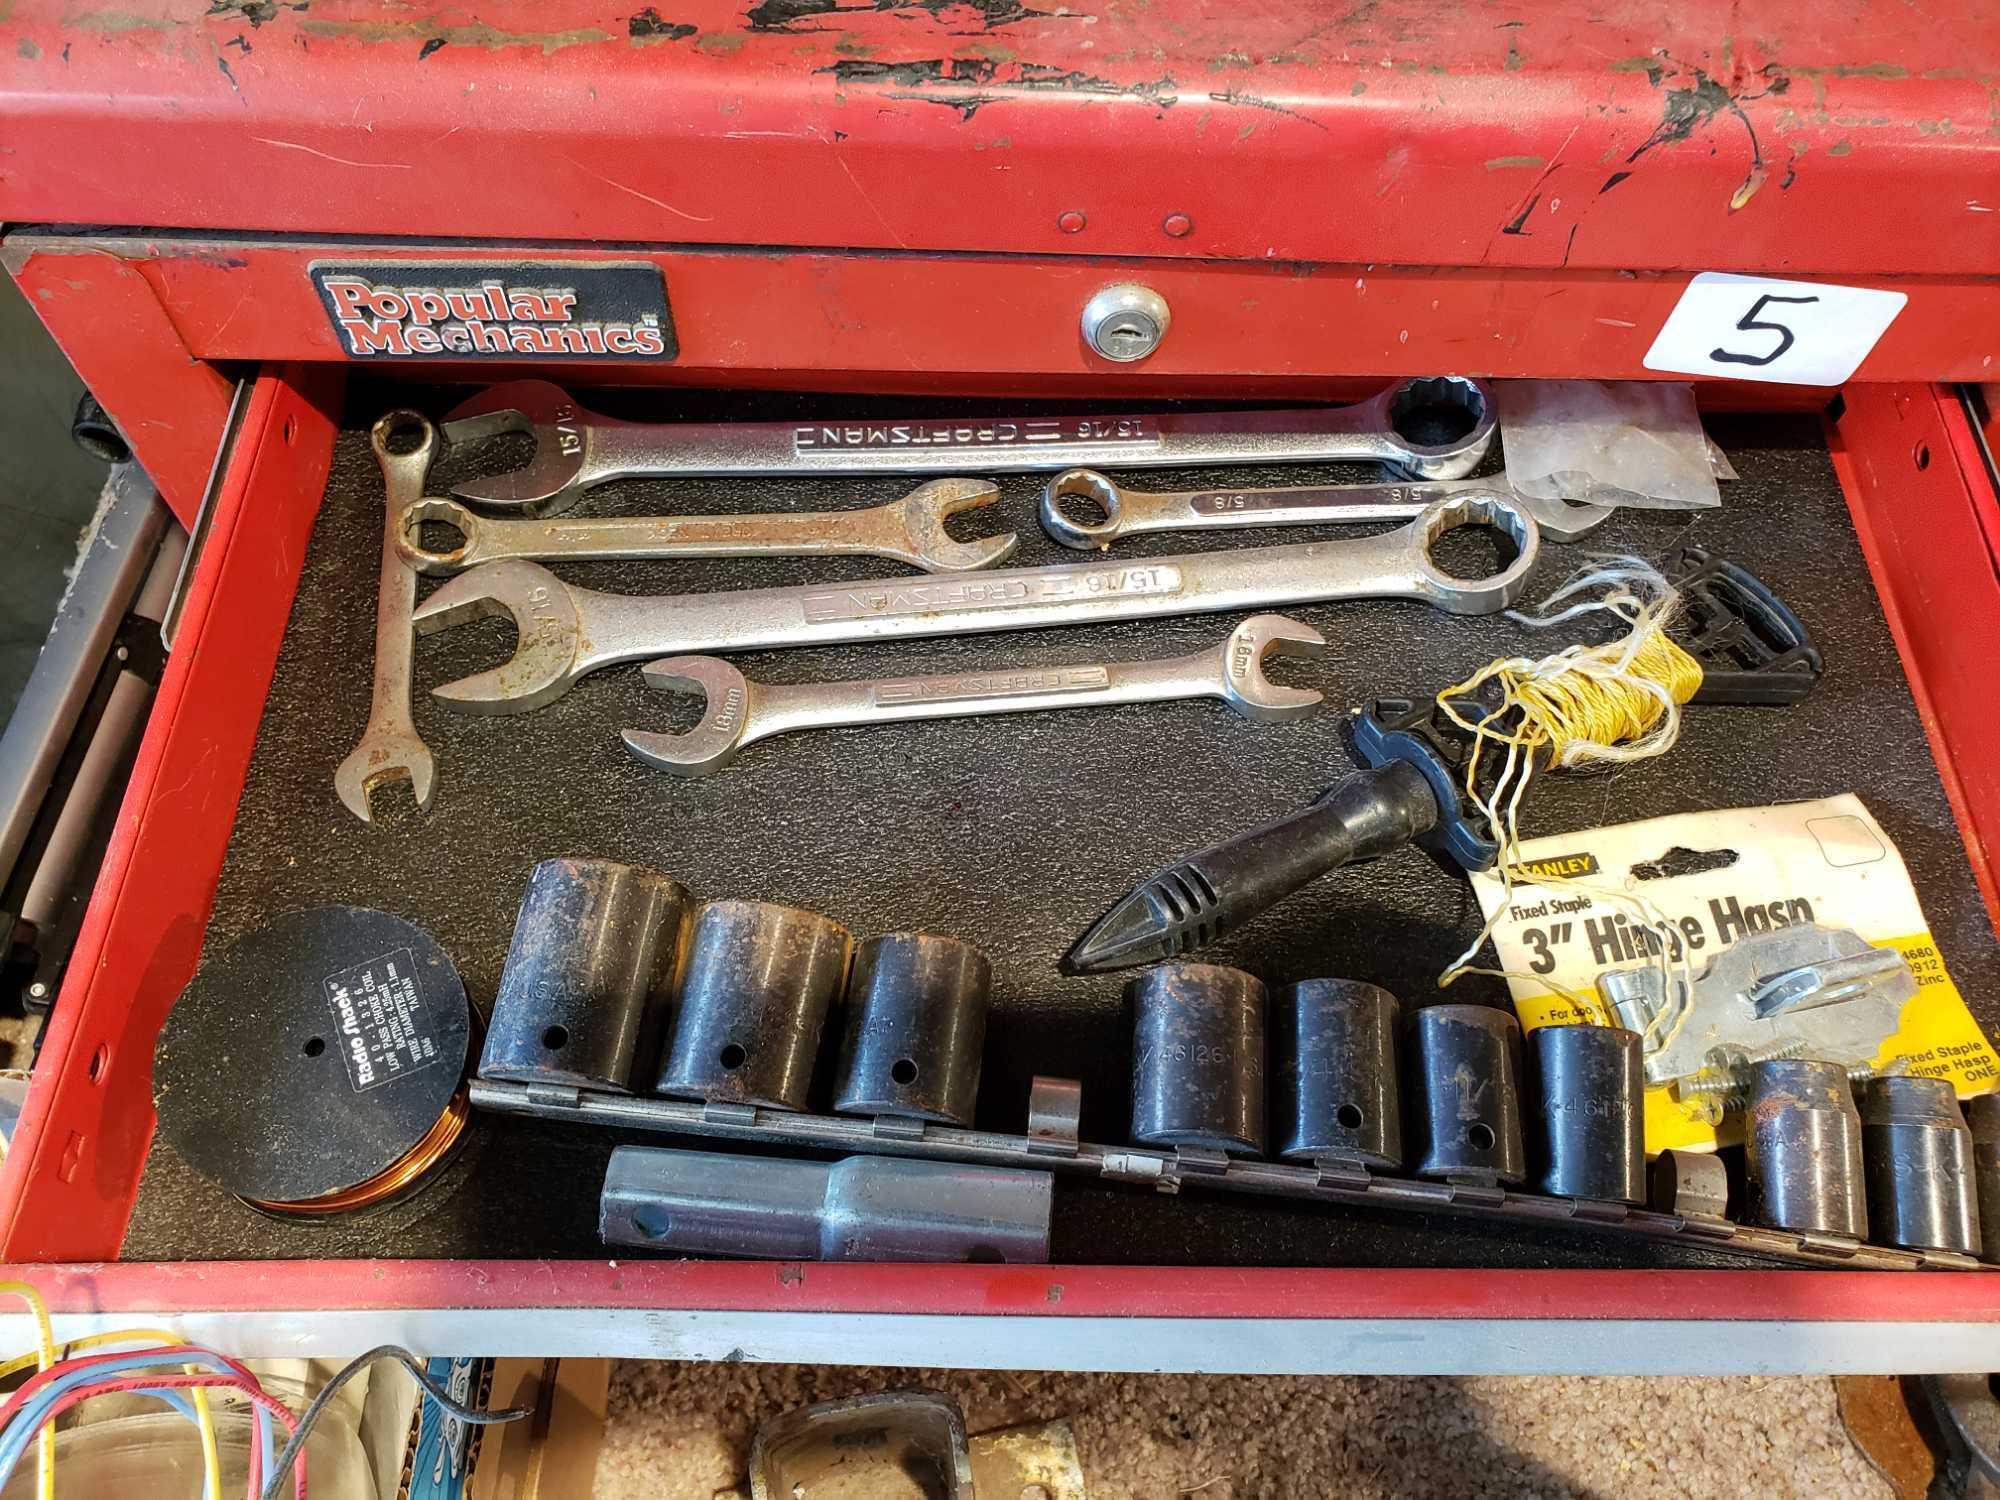 POPULAR MECHANICS tool box: CRAFTSMAN Wrenches Sockets Tools included